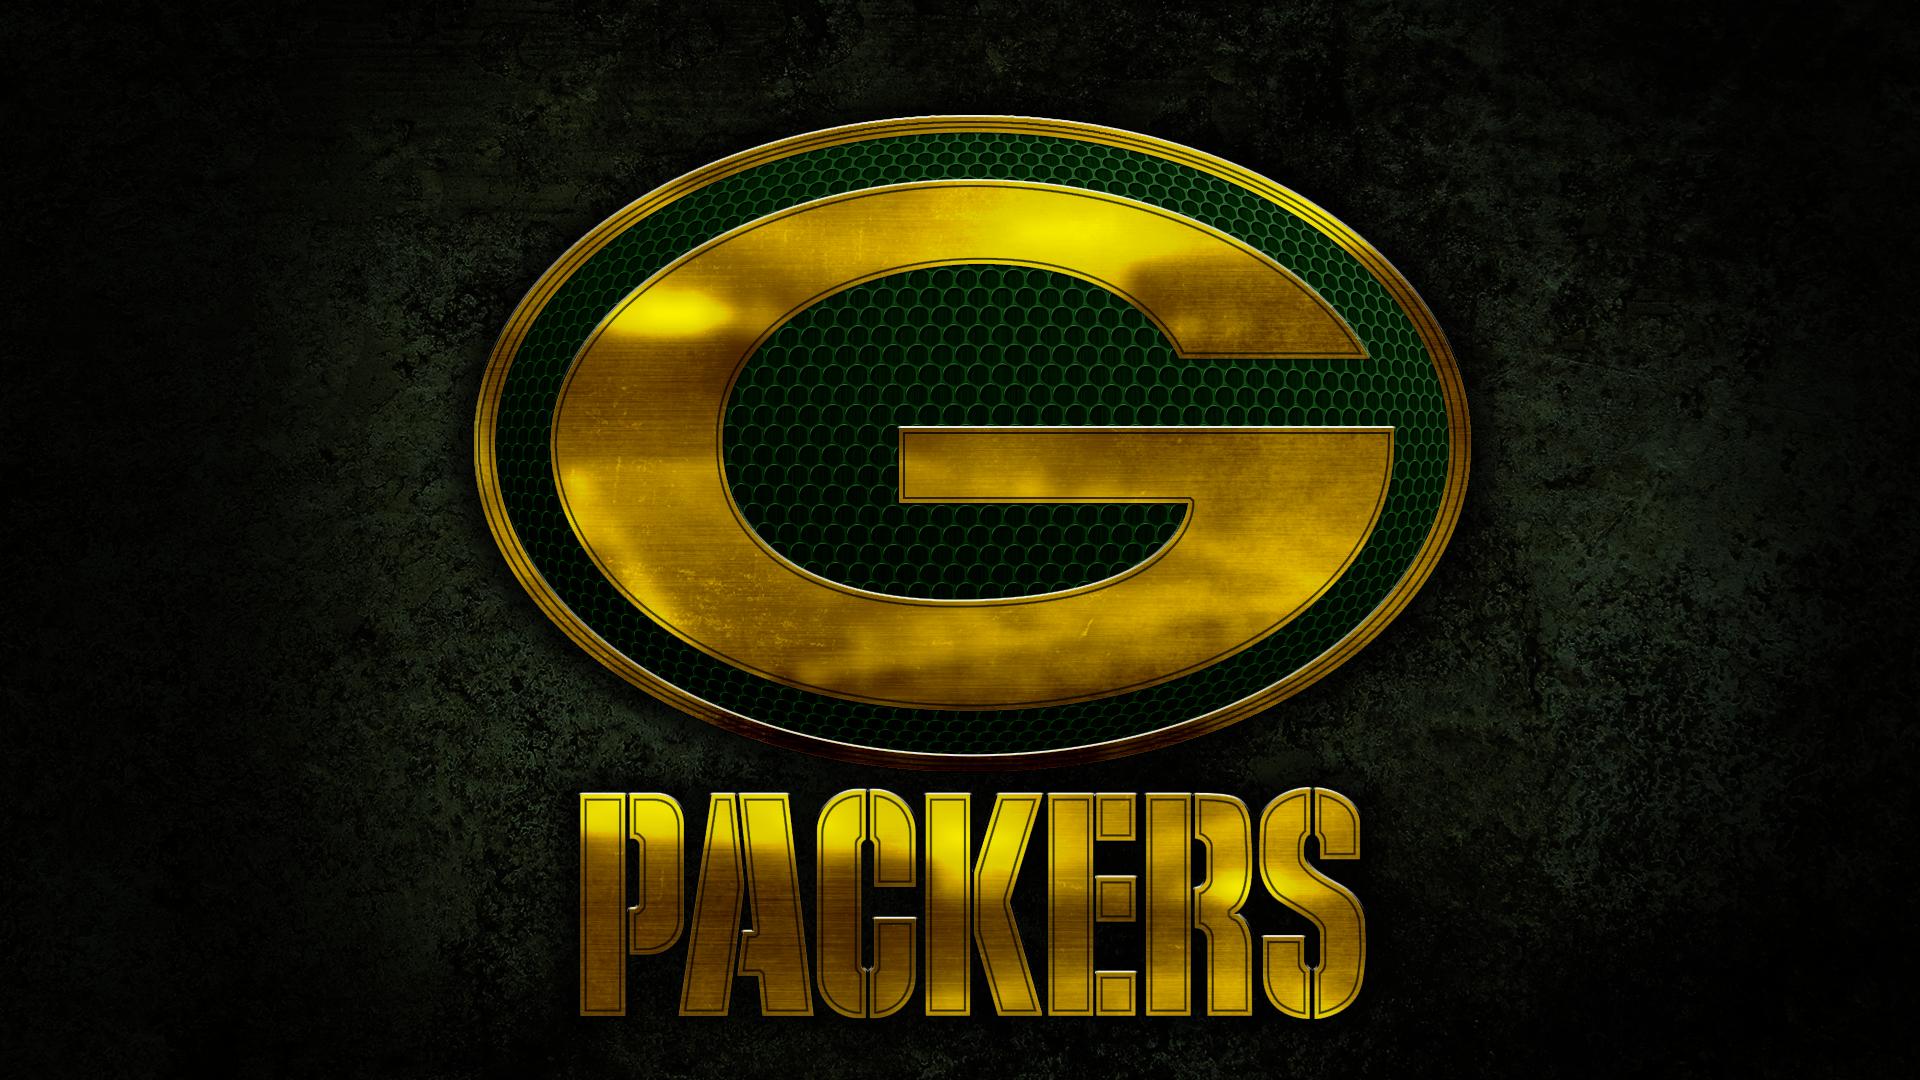 What Are Your Packers Wallpaper Greenbaypackers